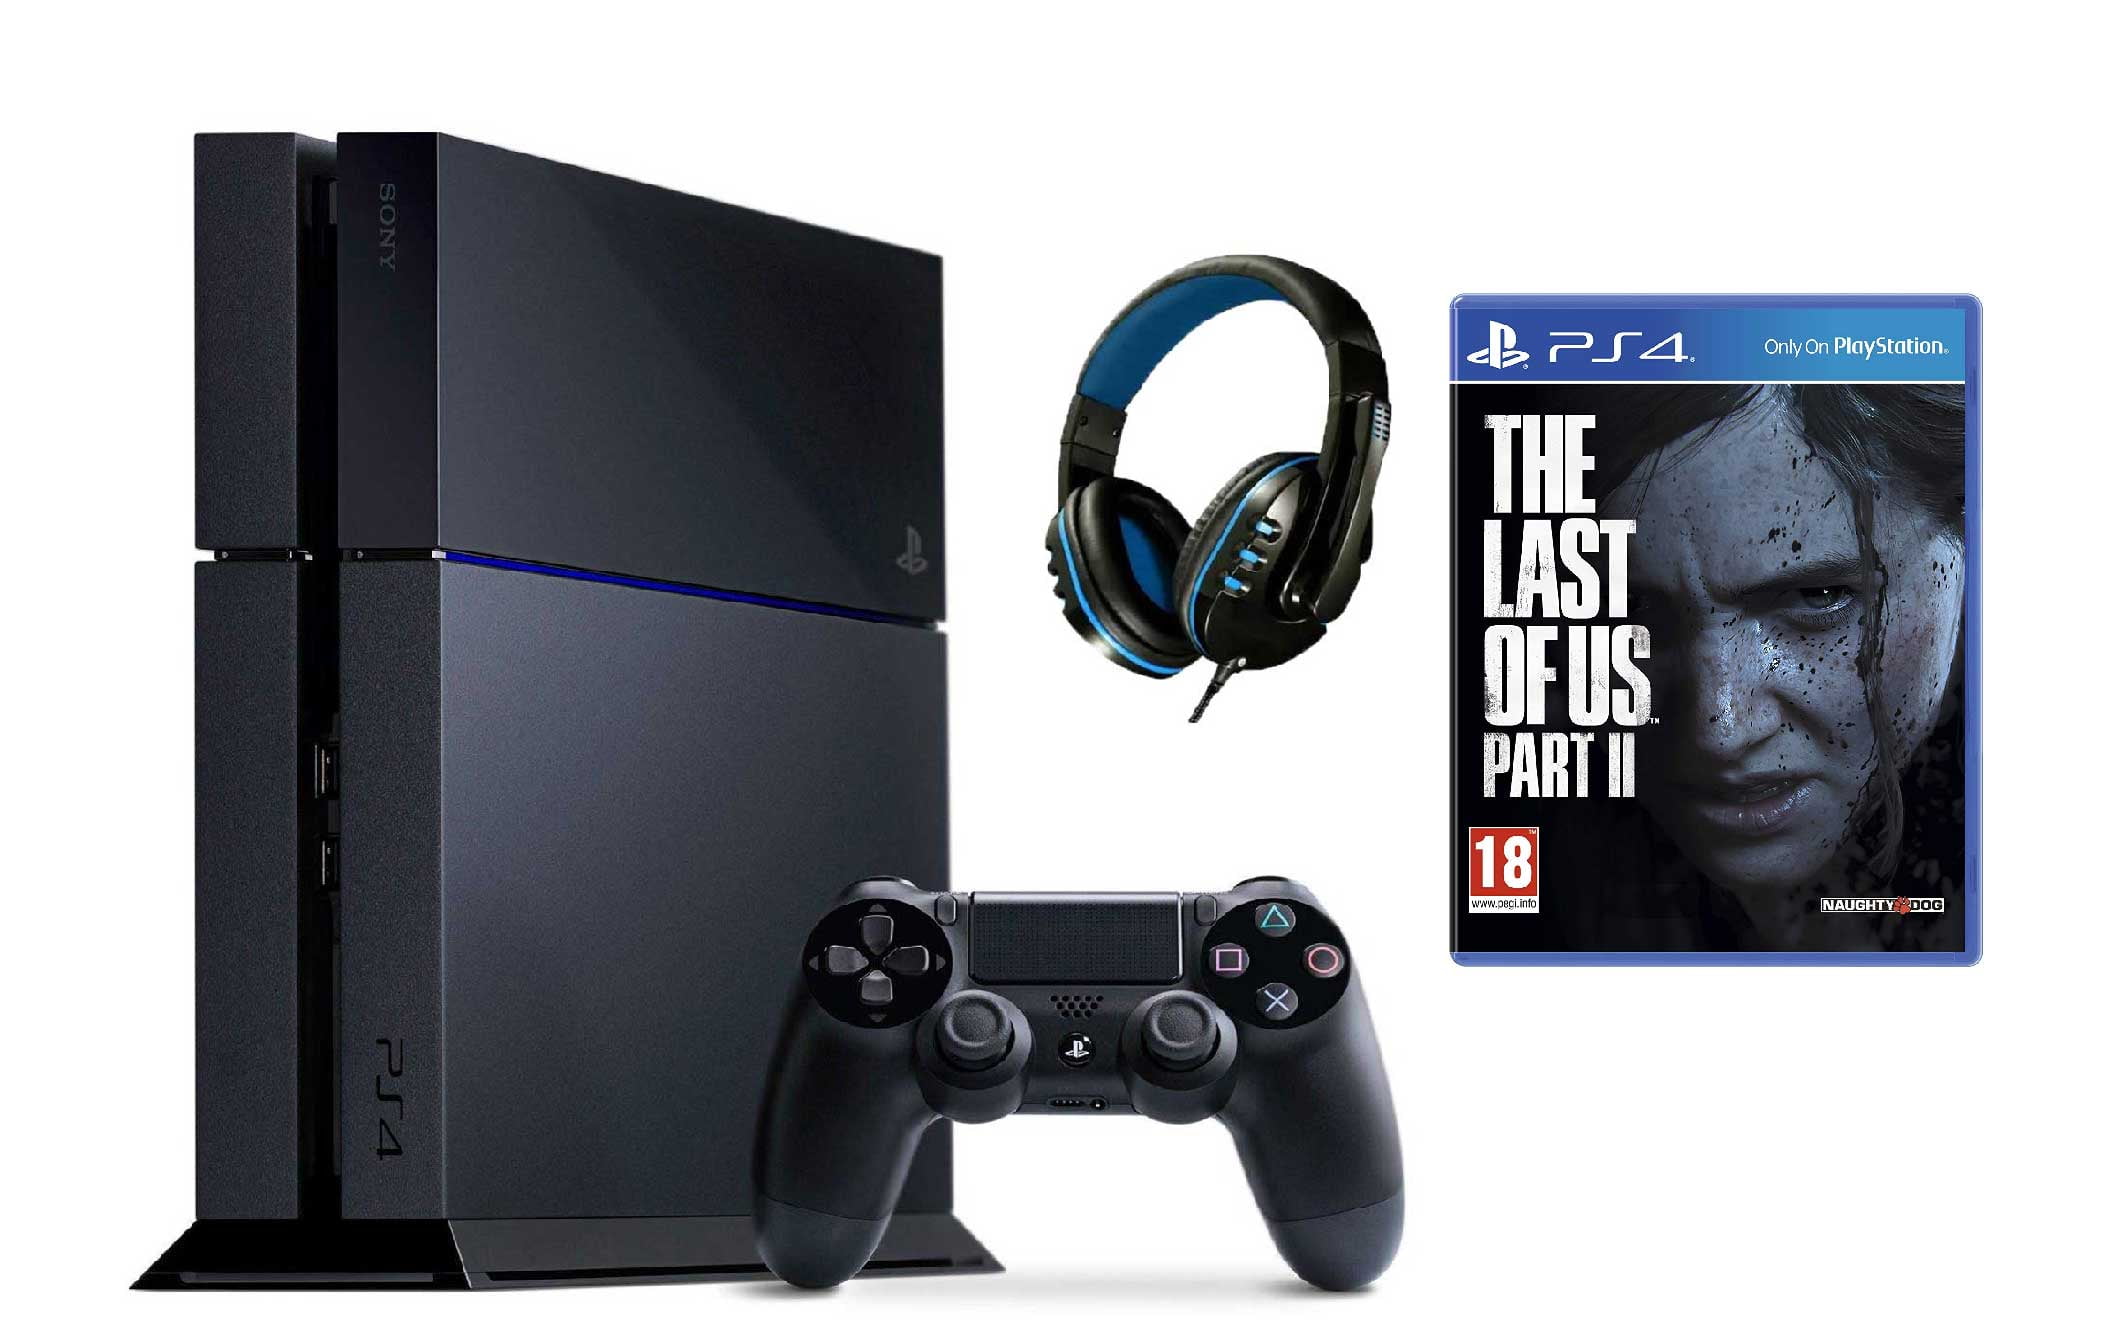 Afsky grit Vise dig Sony PlayStation 4 500GB Gaming Console Black with The Last of Us Part II  BOLT AXTION Bundle Like New - Walmart.com